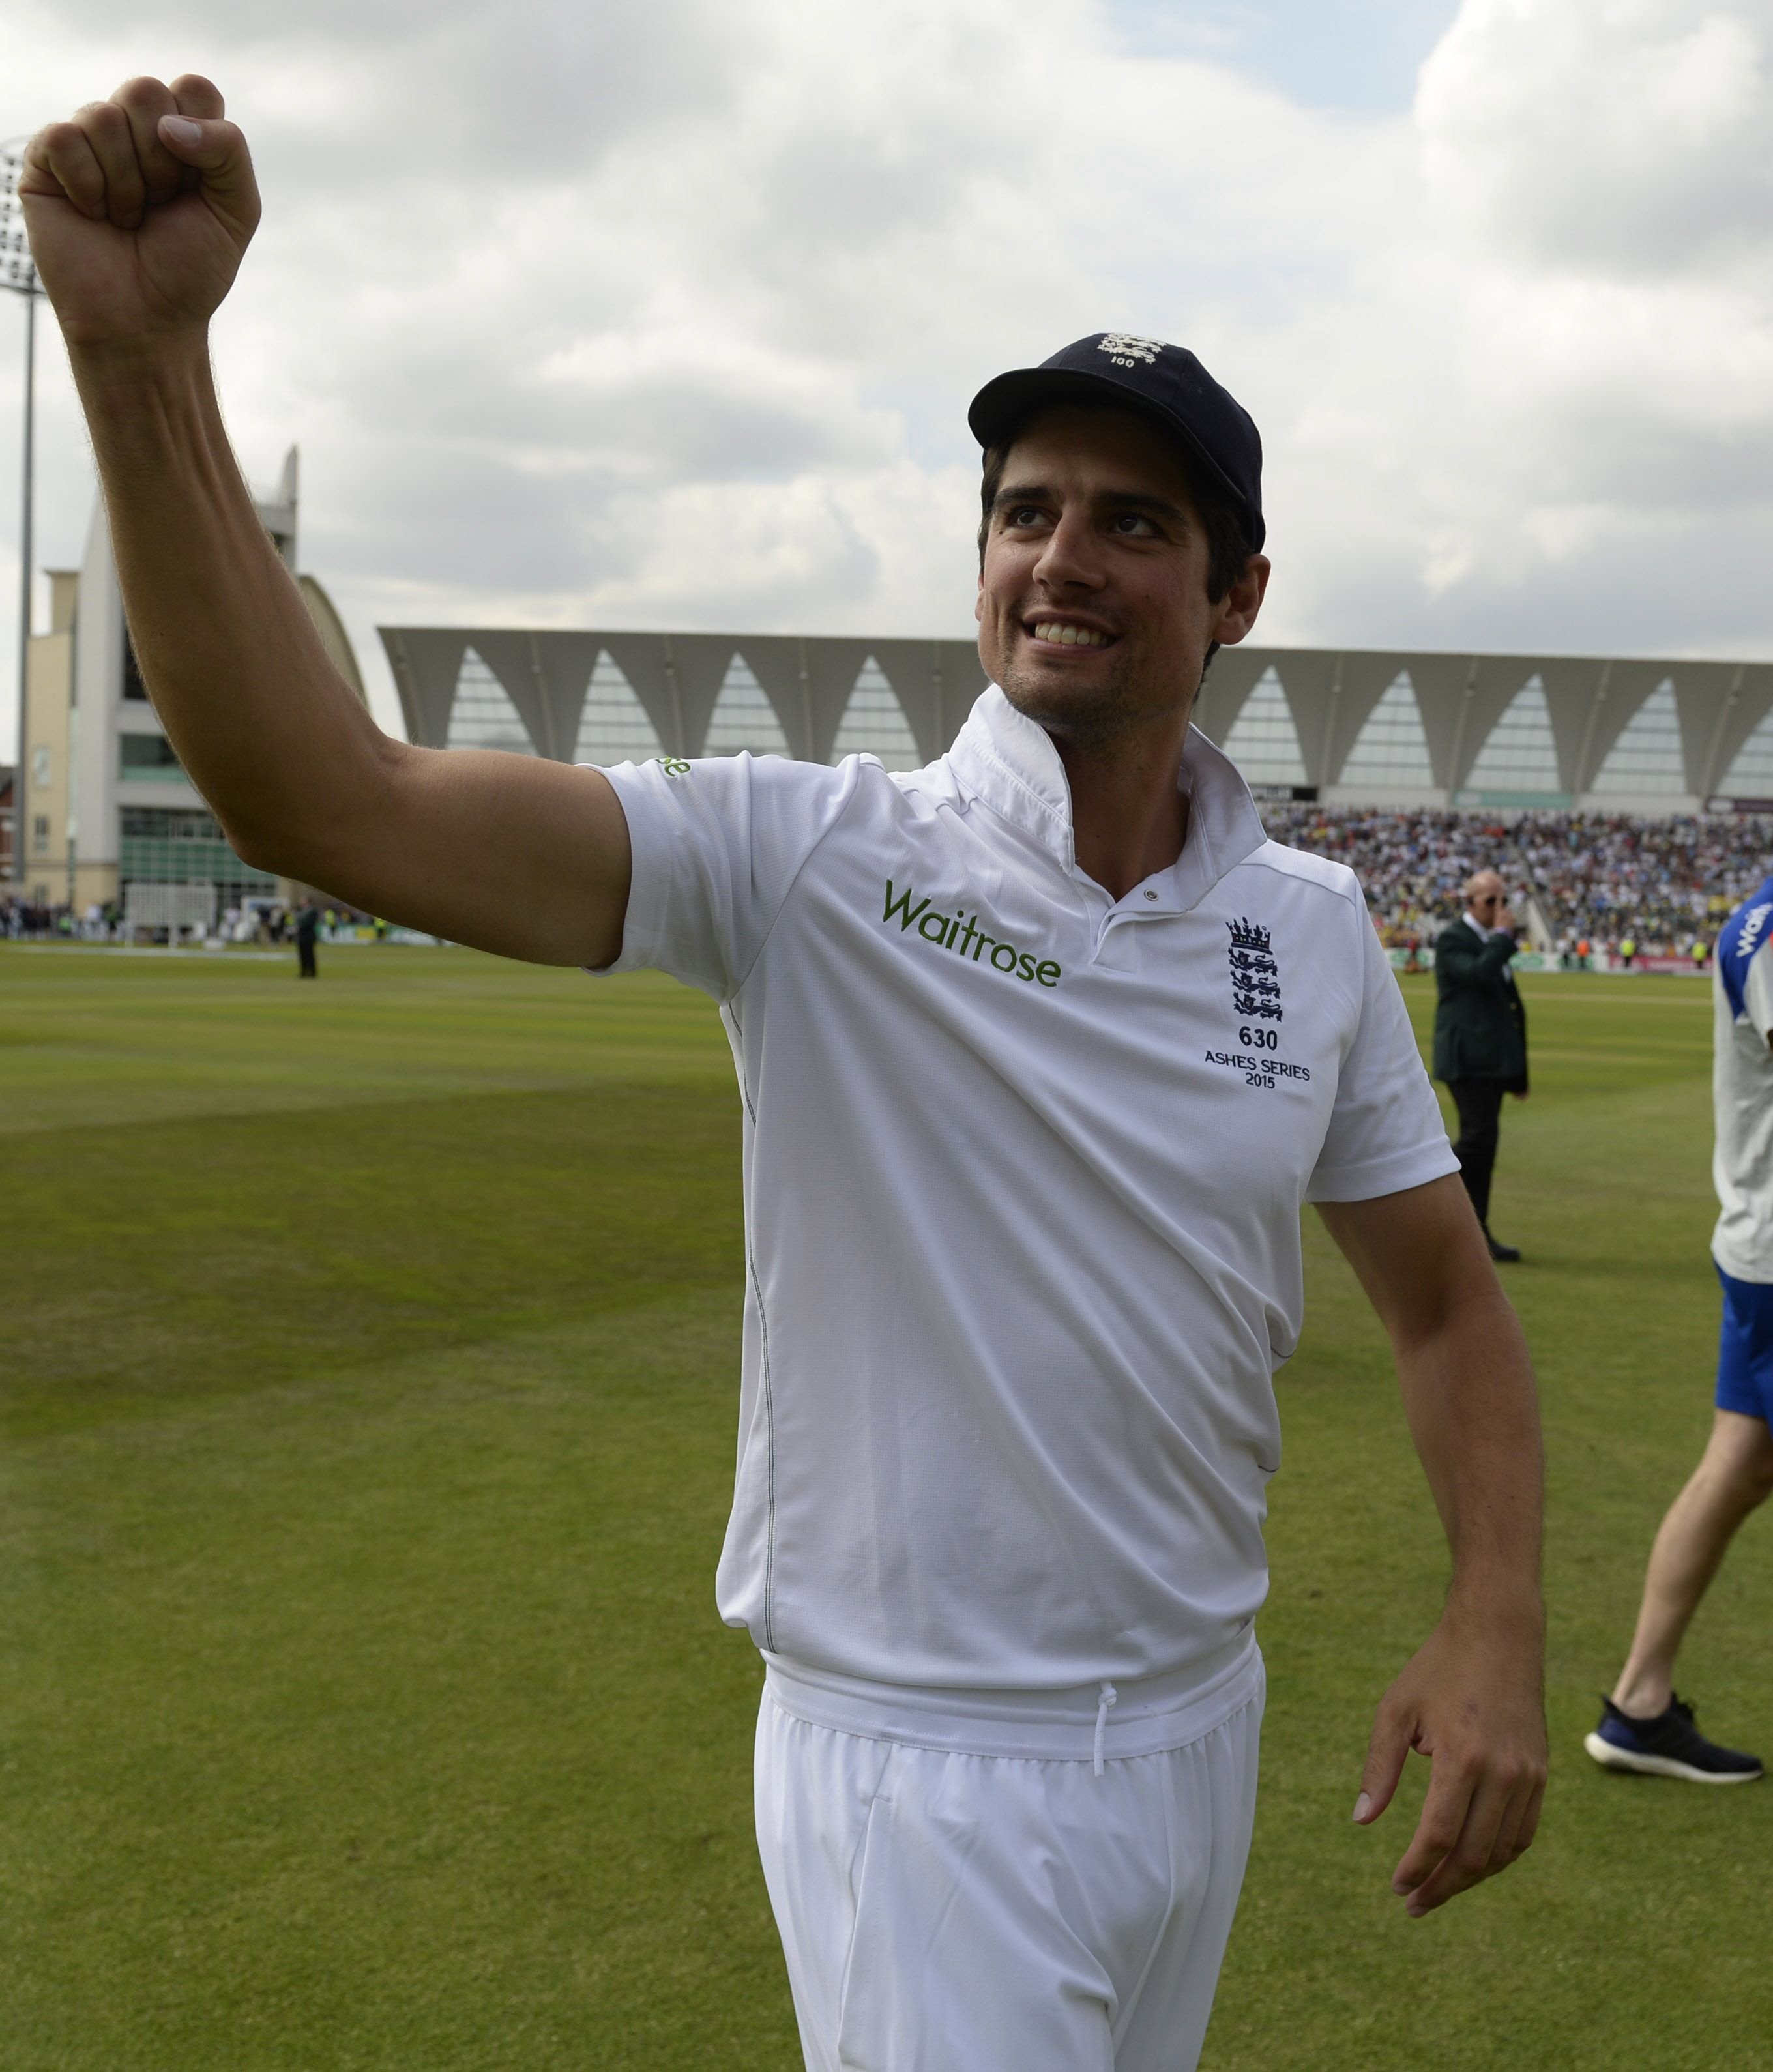 england 039 s captain alastair cook celebrates on the pitch after england wrap up the game and retain the ashes on the third day of the fourth ashes cricket test match between england and australia photo afp